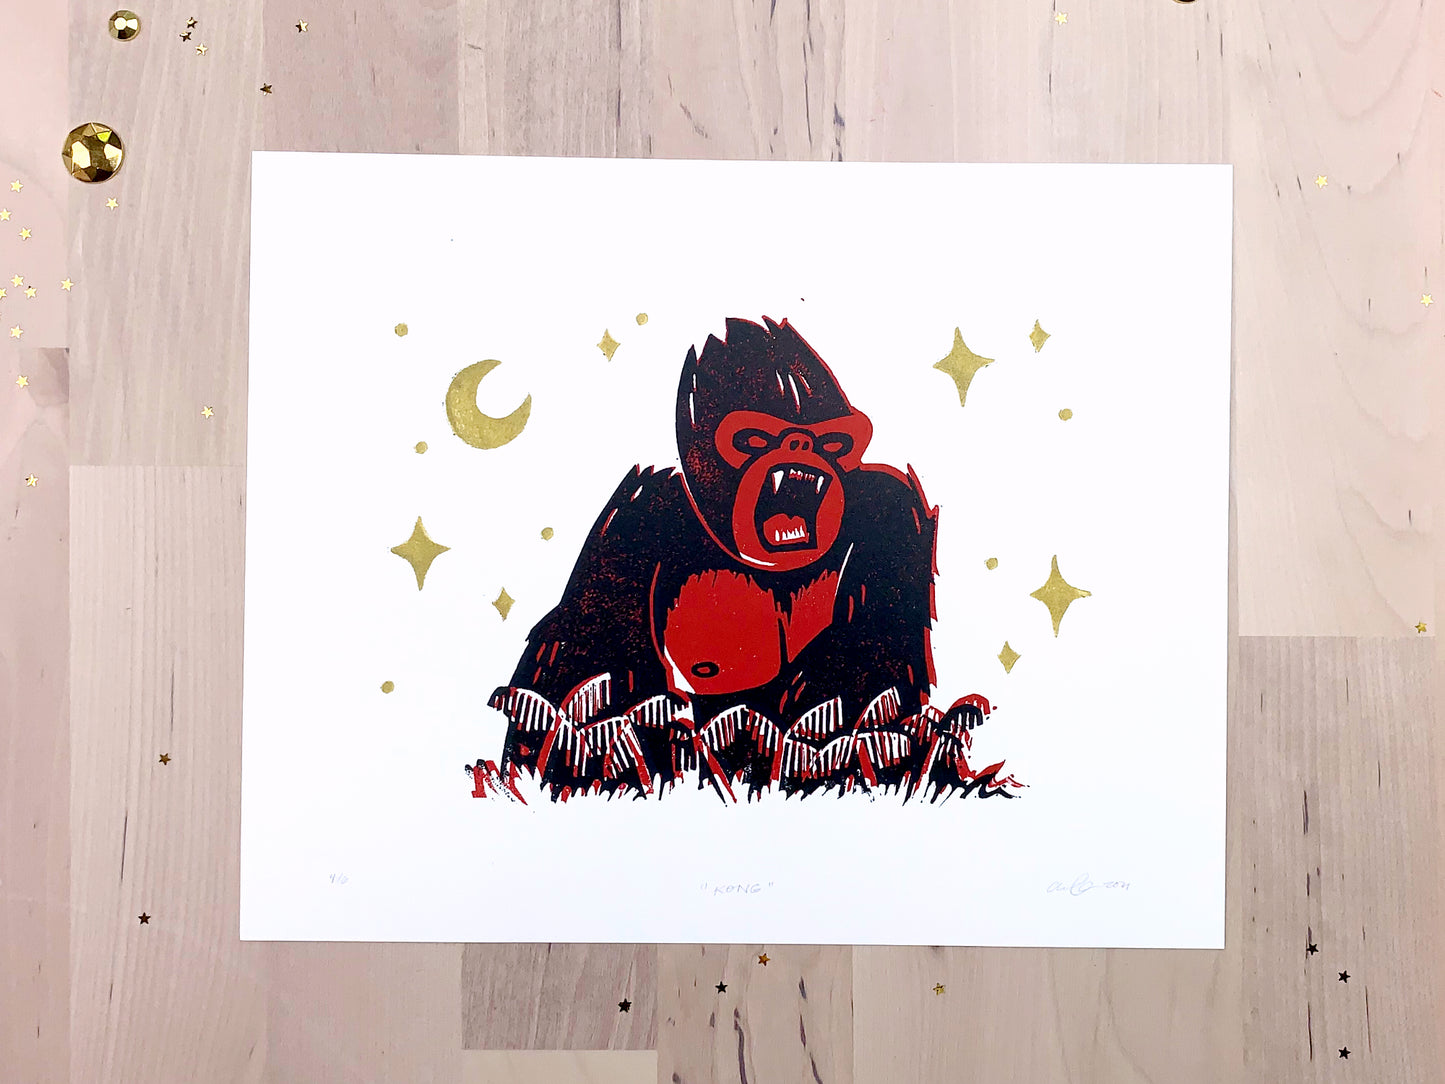 Original limited edition #4 art print by Amber Orenstein. Two color, red and black, reduction block print of a King Kong roaring on his jungle island home with gold stars and moon.